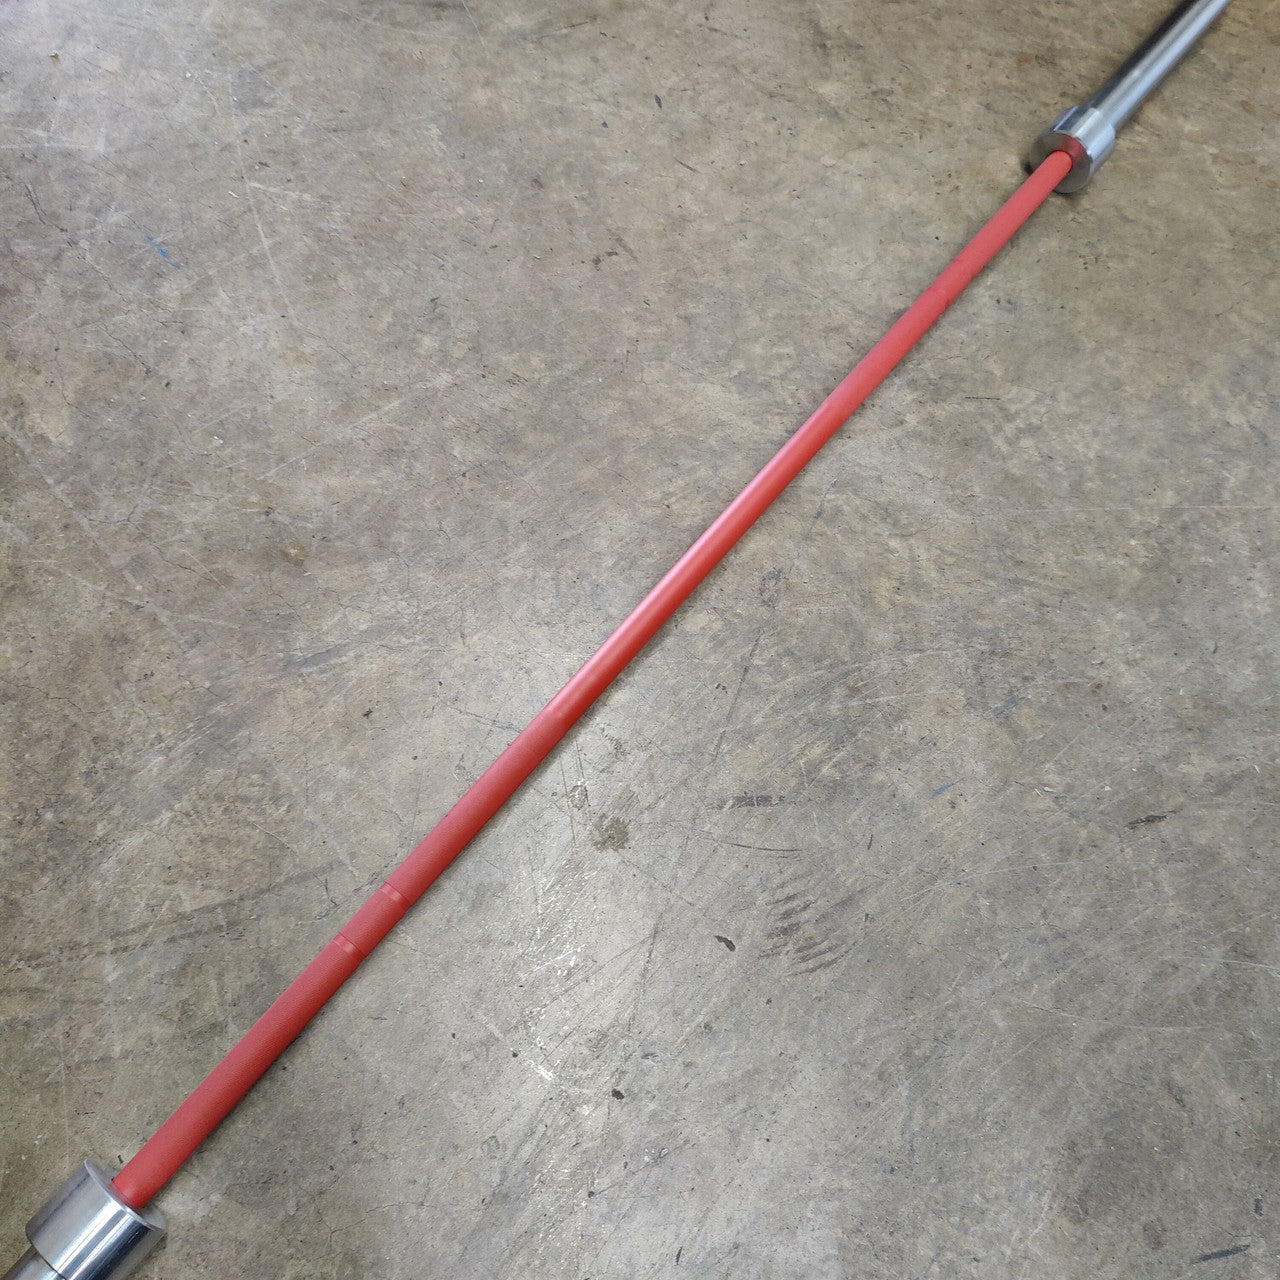 NEW Red Cerakote Barbell, Contender Series, 20kg/45lb (Blem) Made in USA